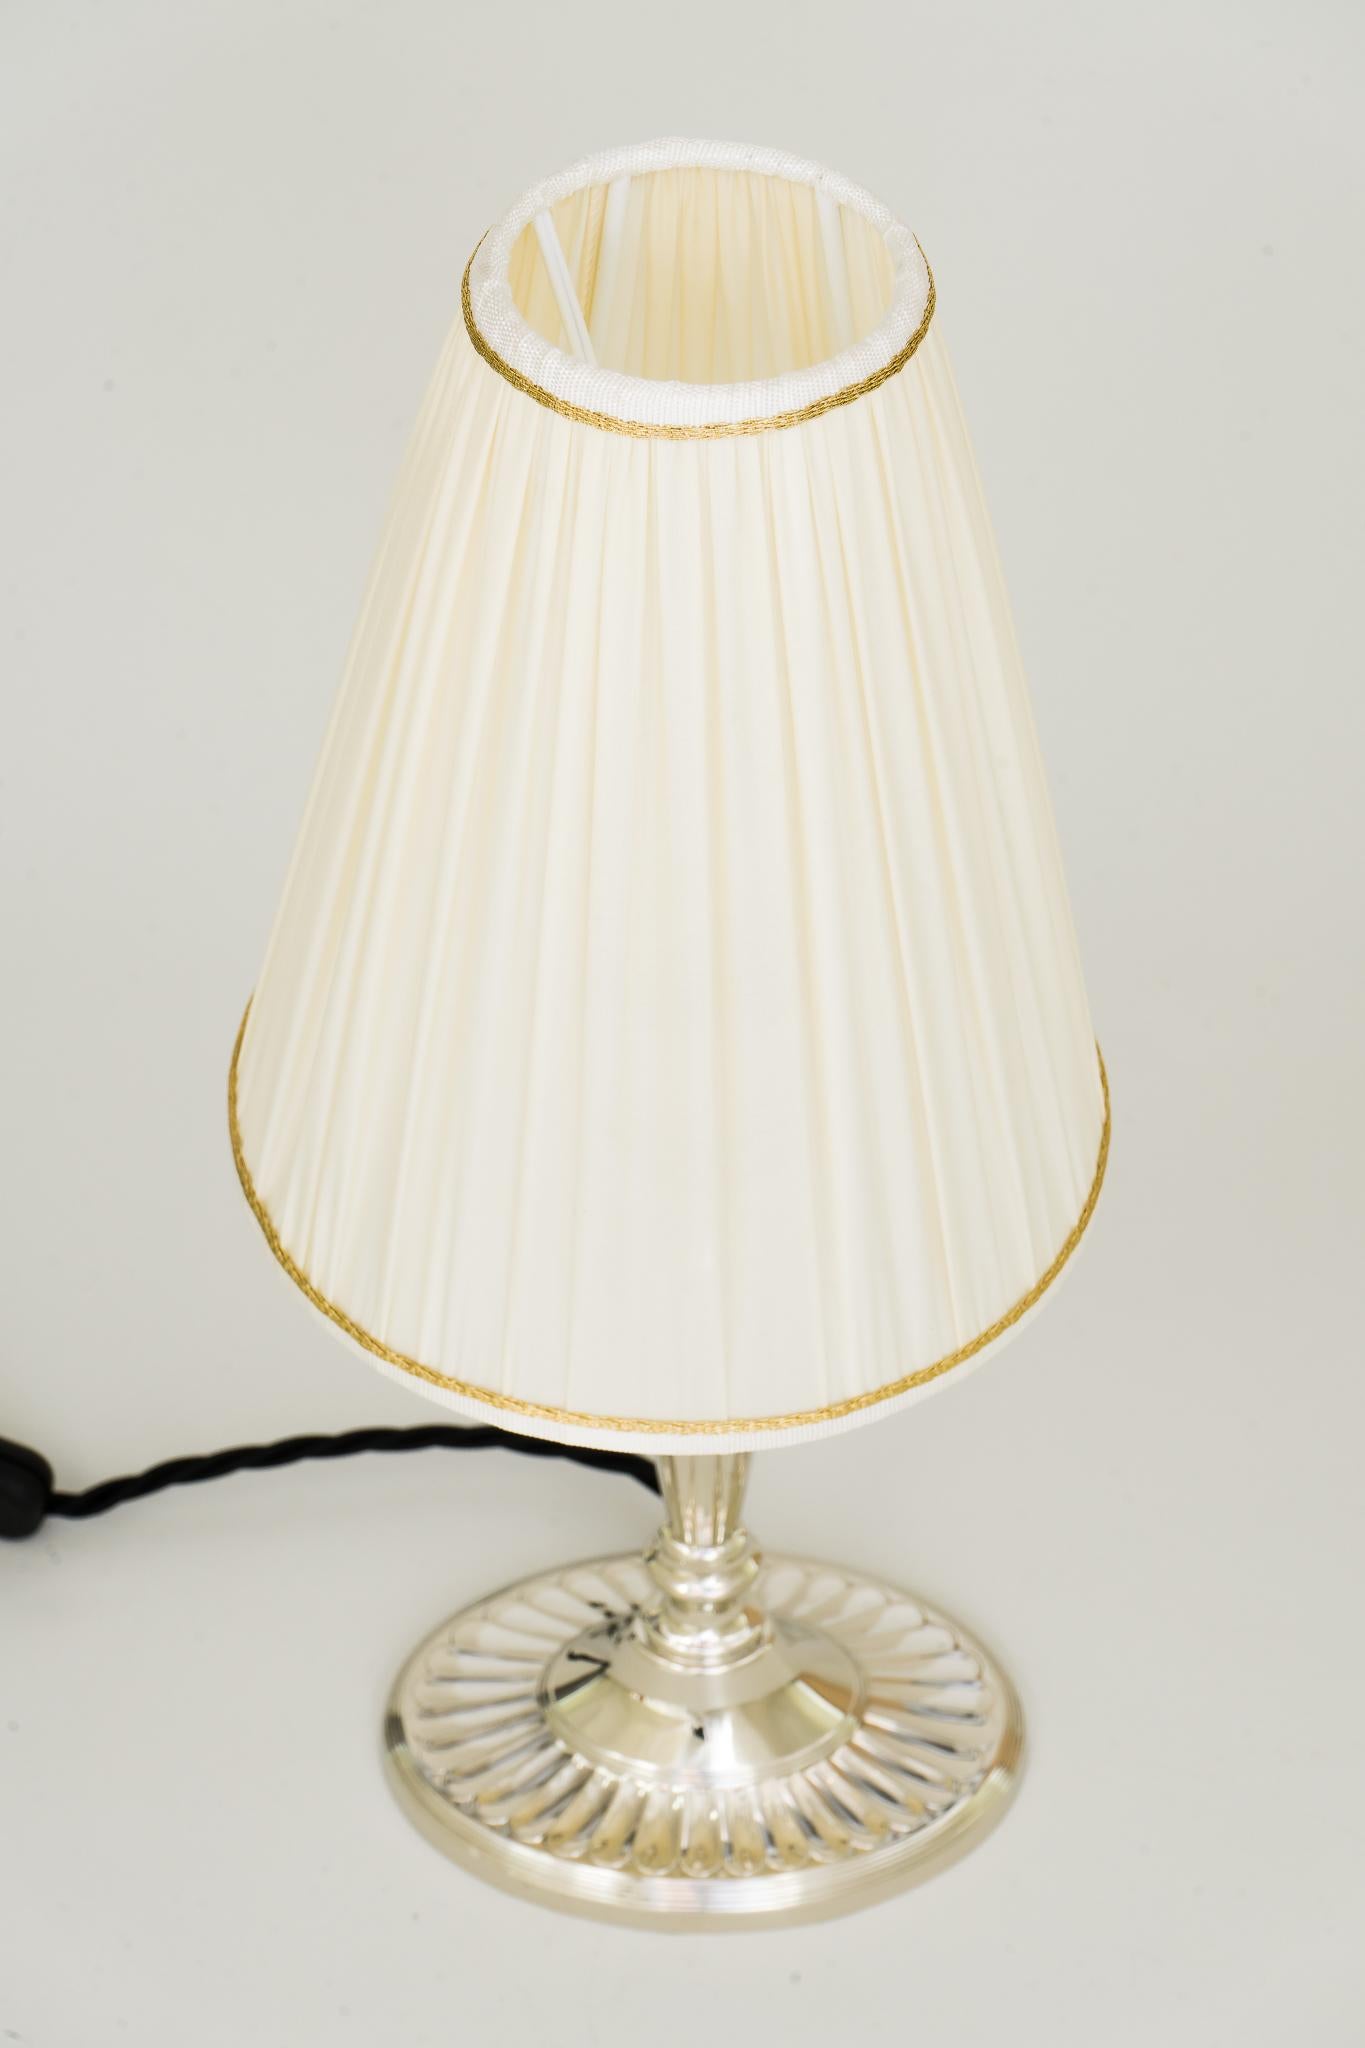 Art Deco oval table lamp alpaca with fabric shade, circa 1920s
Polished and stove enamelled
Shade is replaced (new).